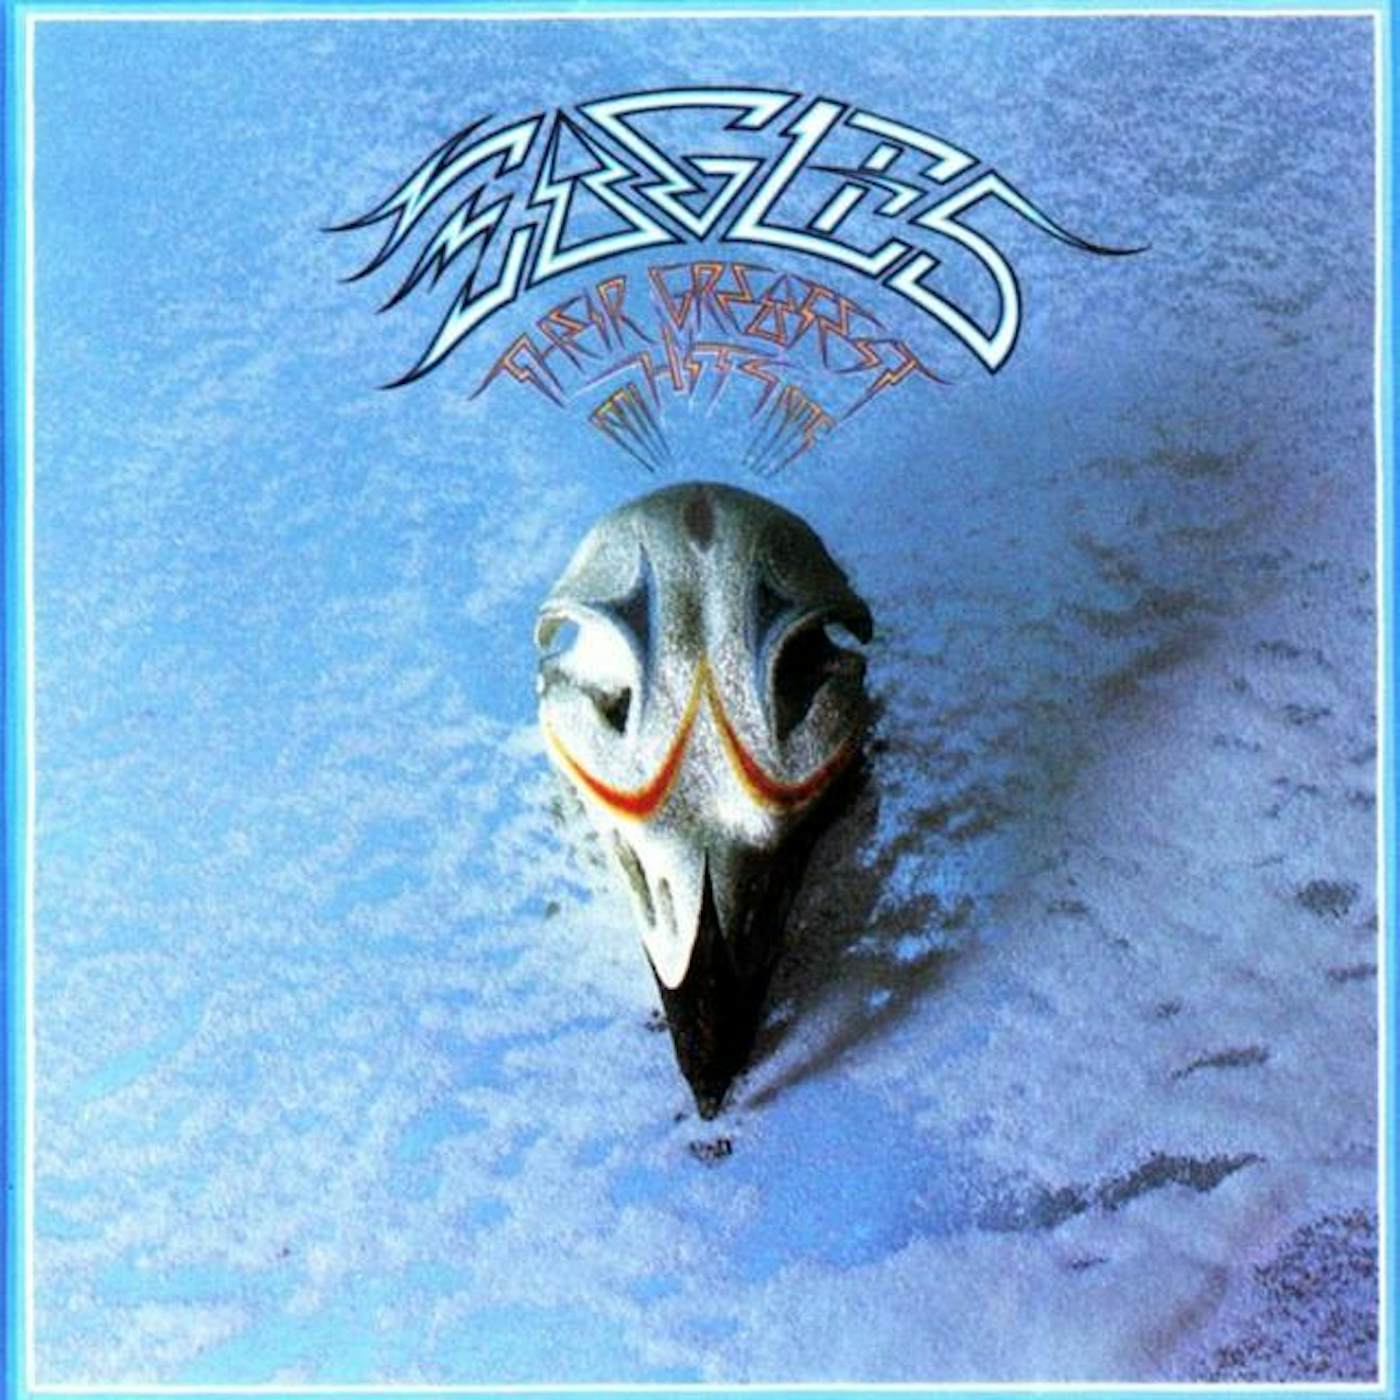 The Very Best of Eagles – Updated Edition